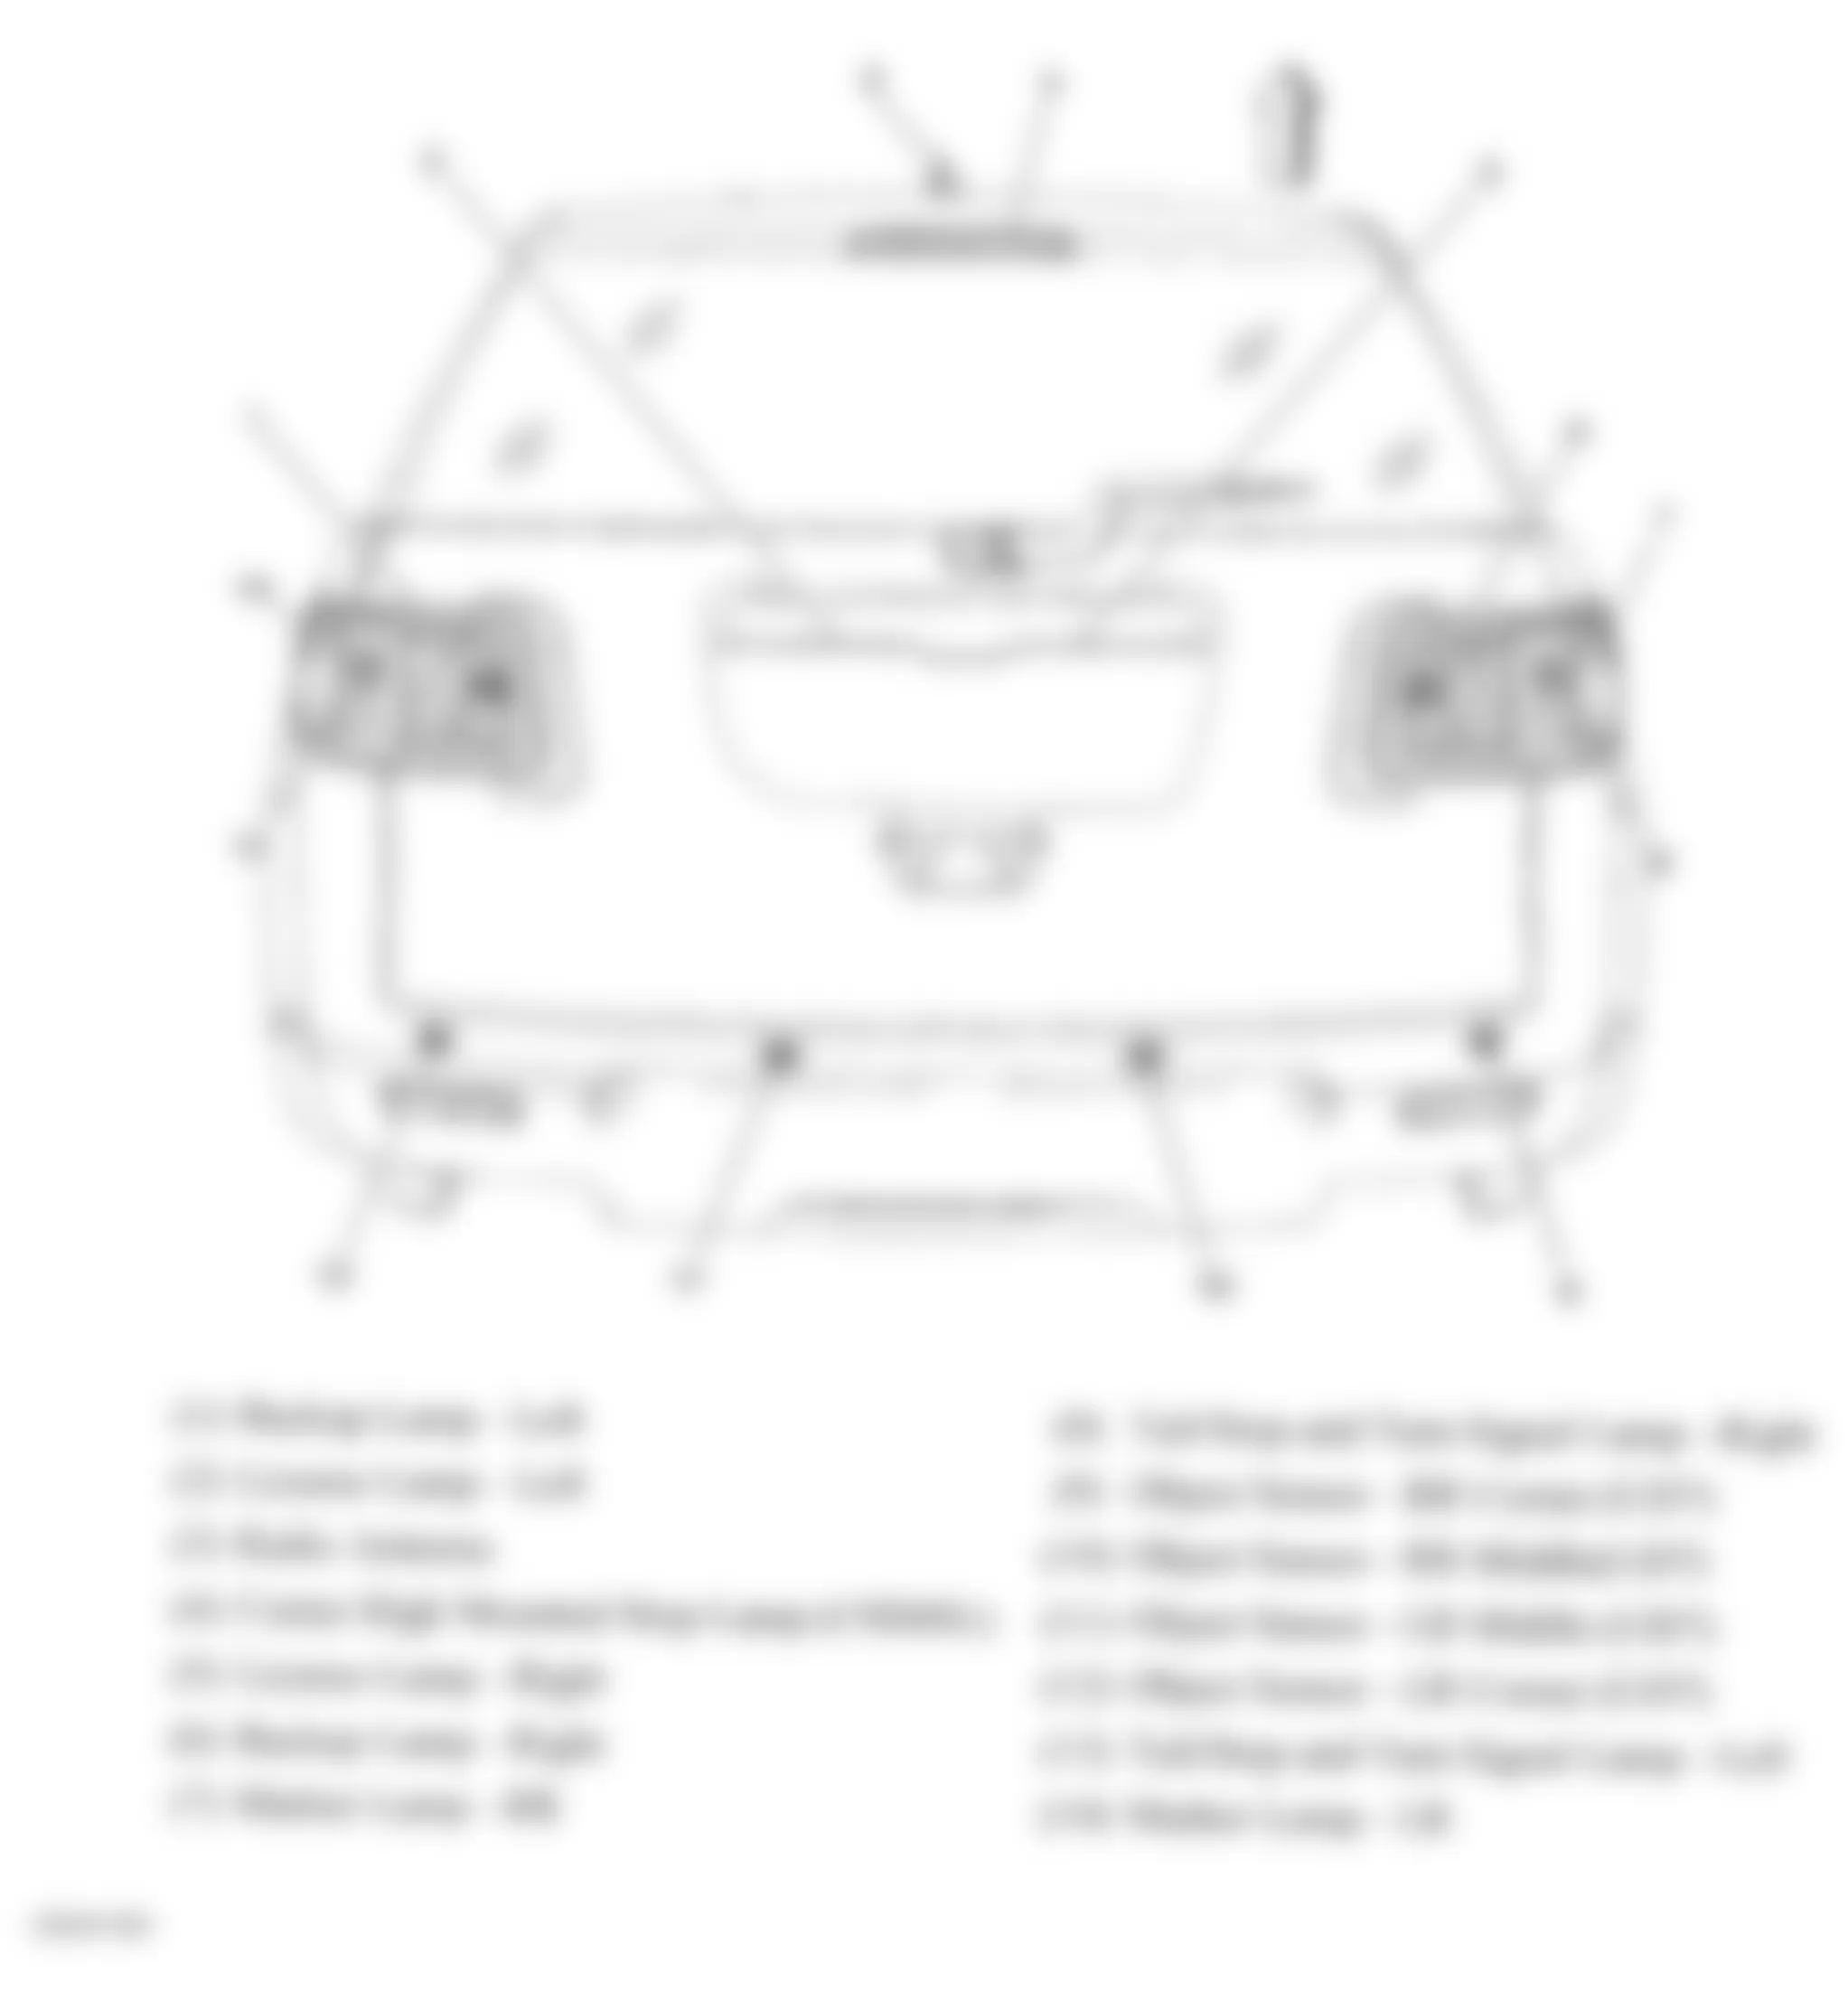 Buick Enclave CXL 2009 - Component Locations -  Rear Of Vehicle (Acadia & Outlook)